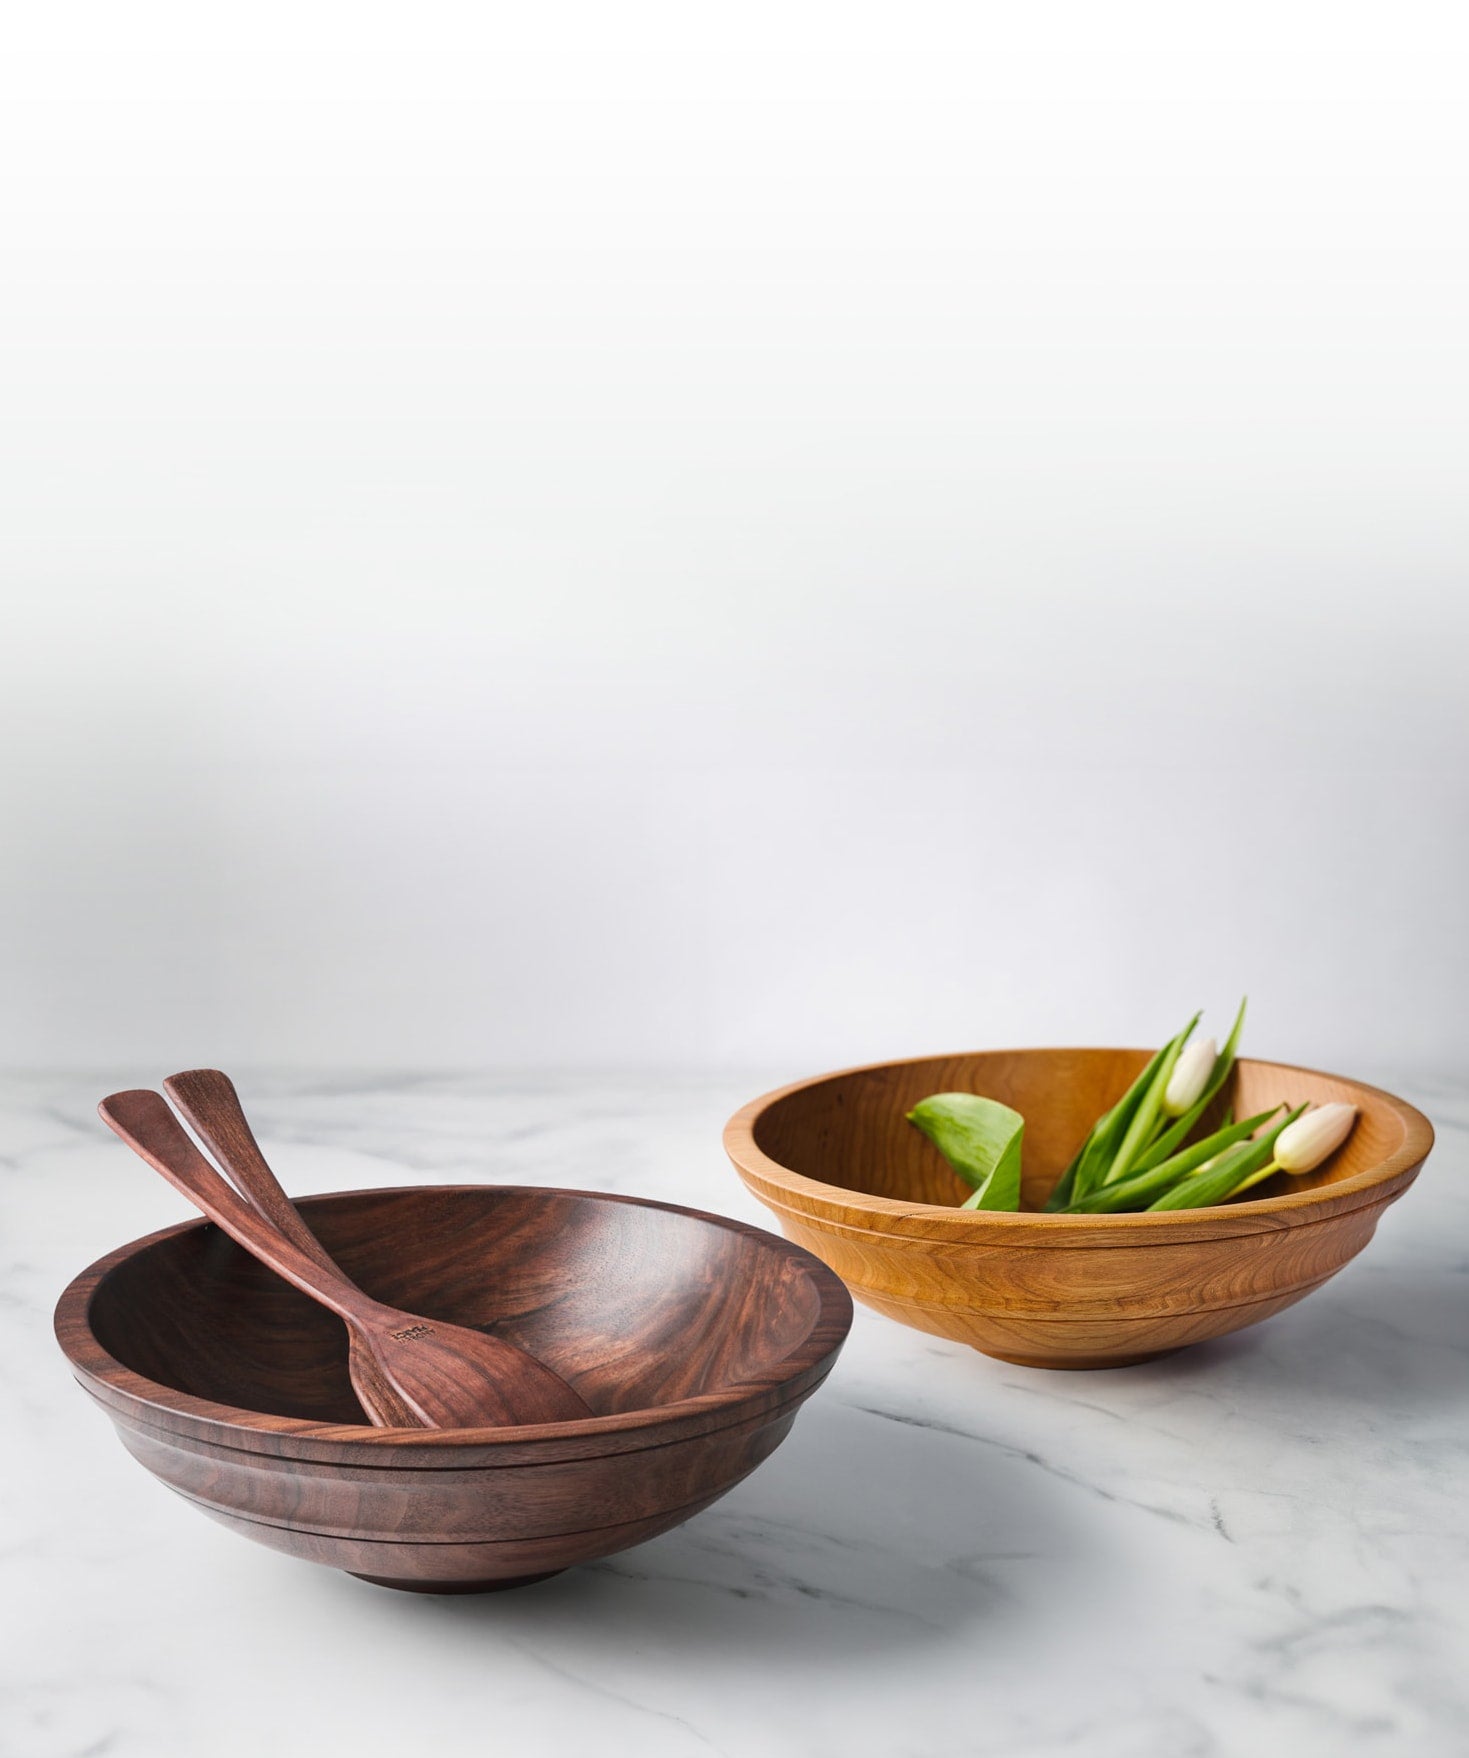 Wooden Bowls from Andrew Pearce Bowls in Hartland VT shown in walnut and cherry with wooden salad servers and fresh cut flowers